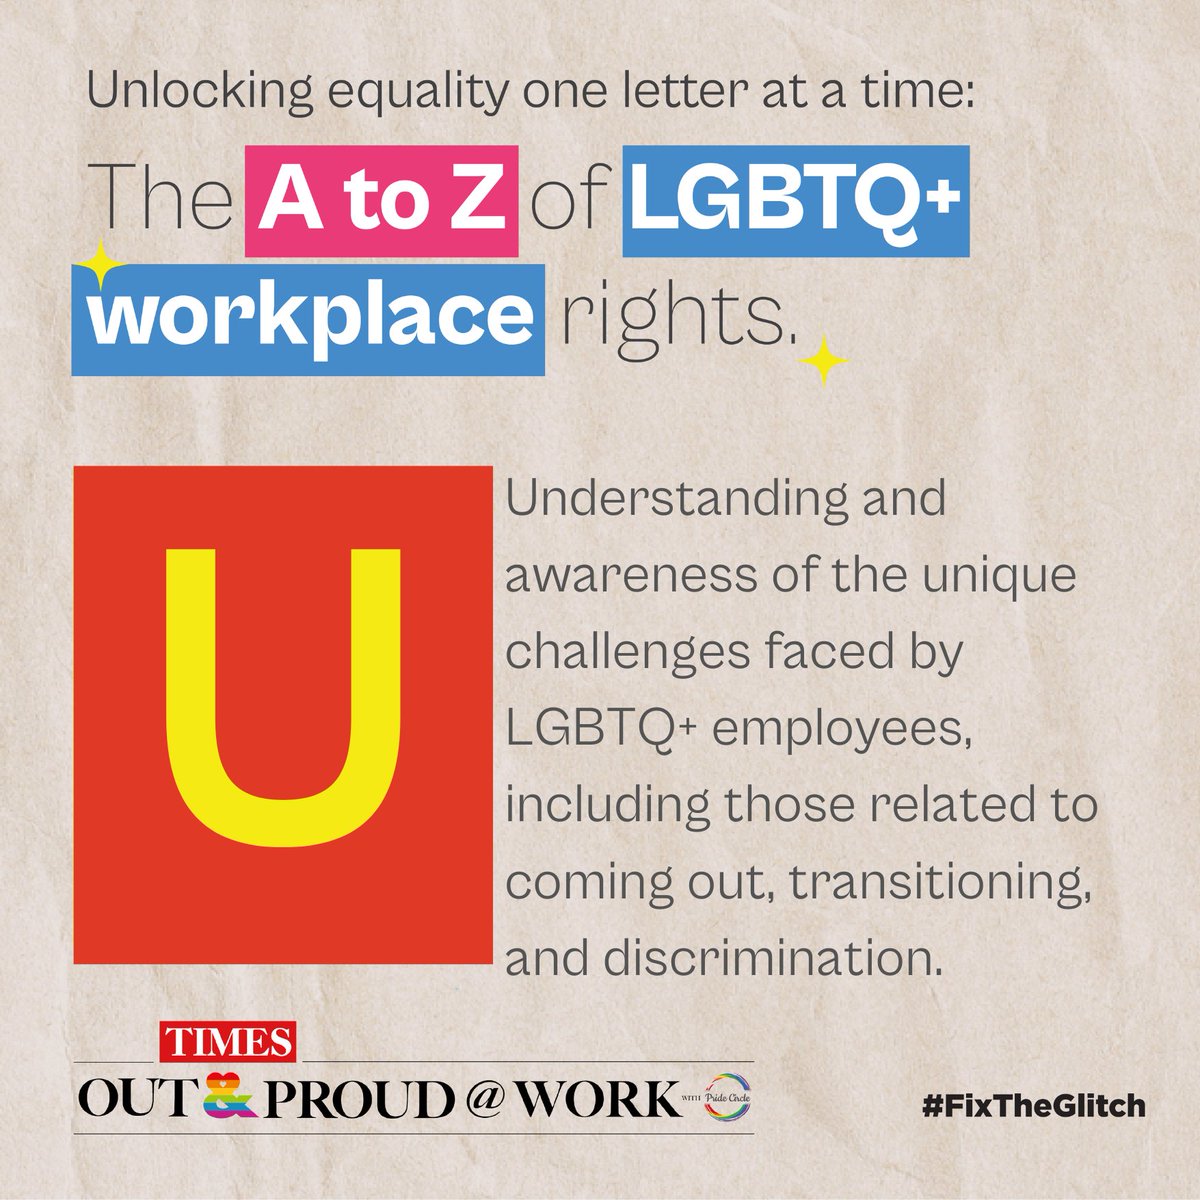 Let’s create change and #FixTheGlitch. Sign up at timesoutandproud.com/#take-my-pledge  

#PrideatWork #Empowerment